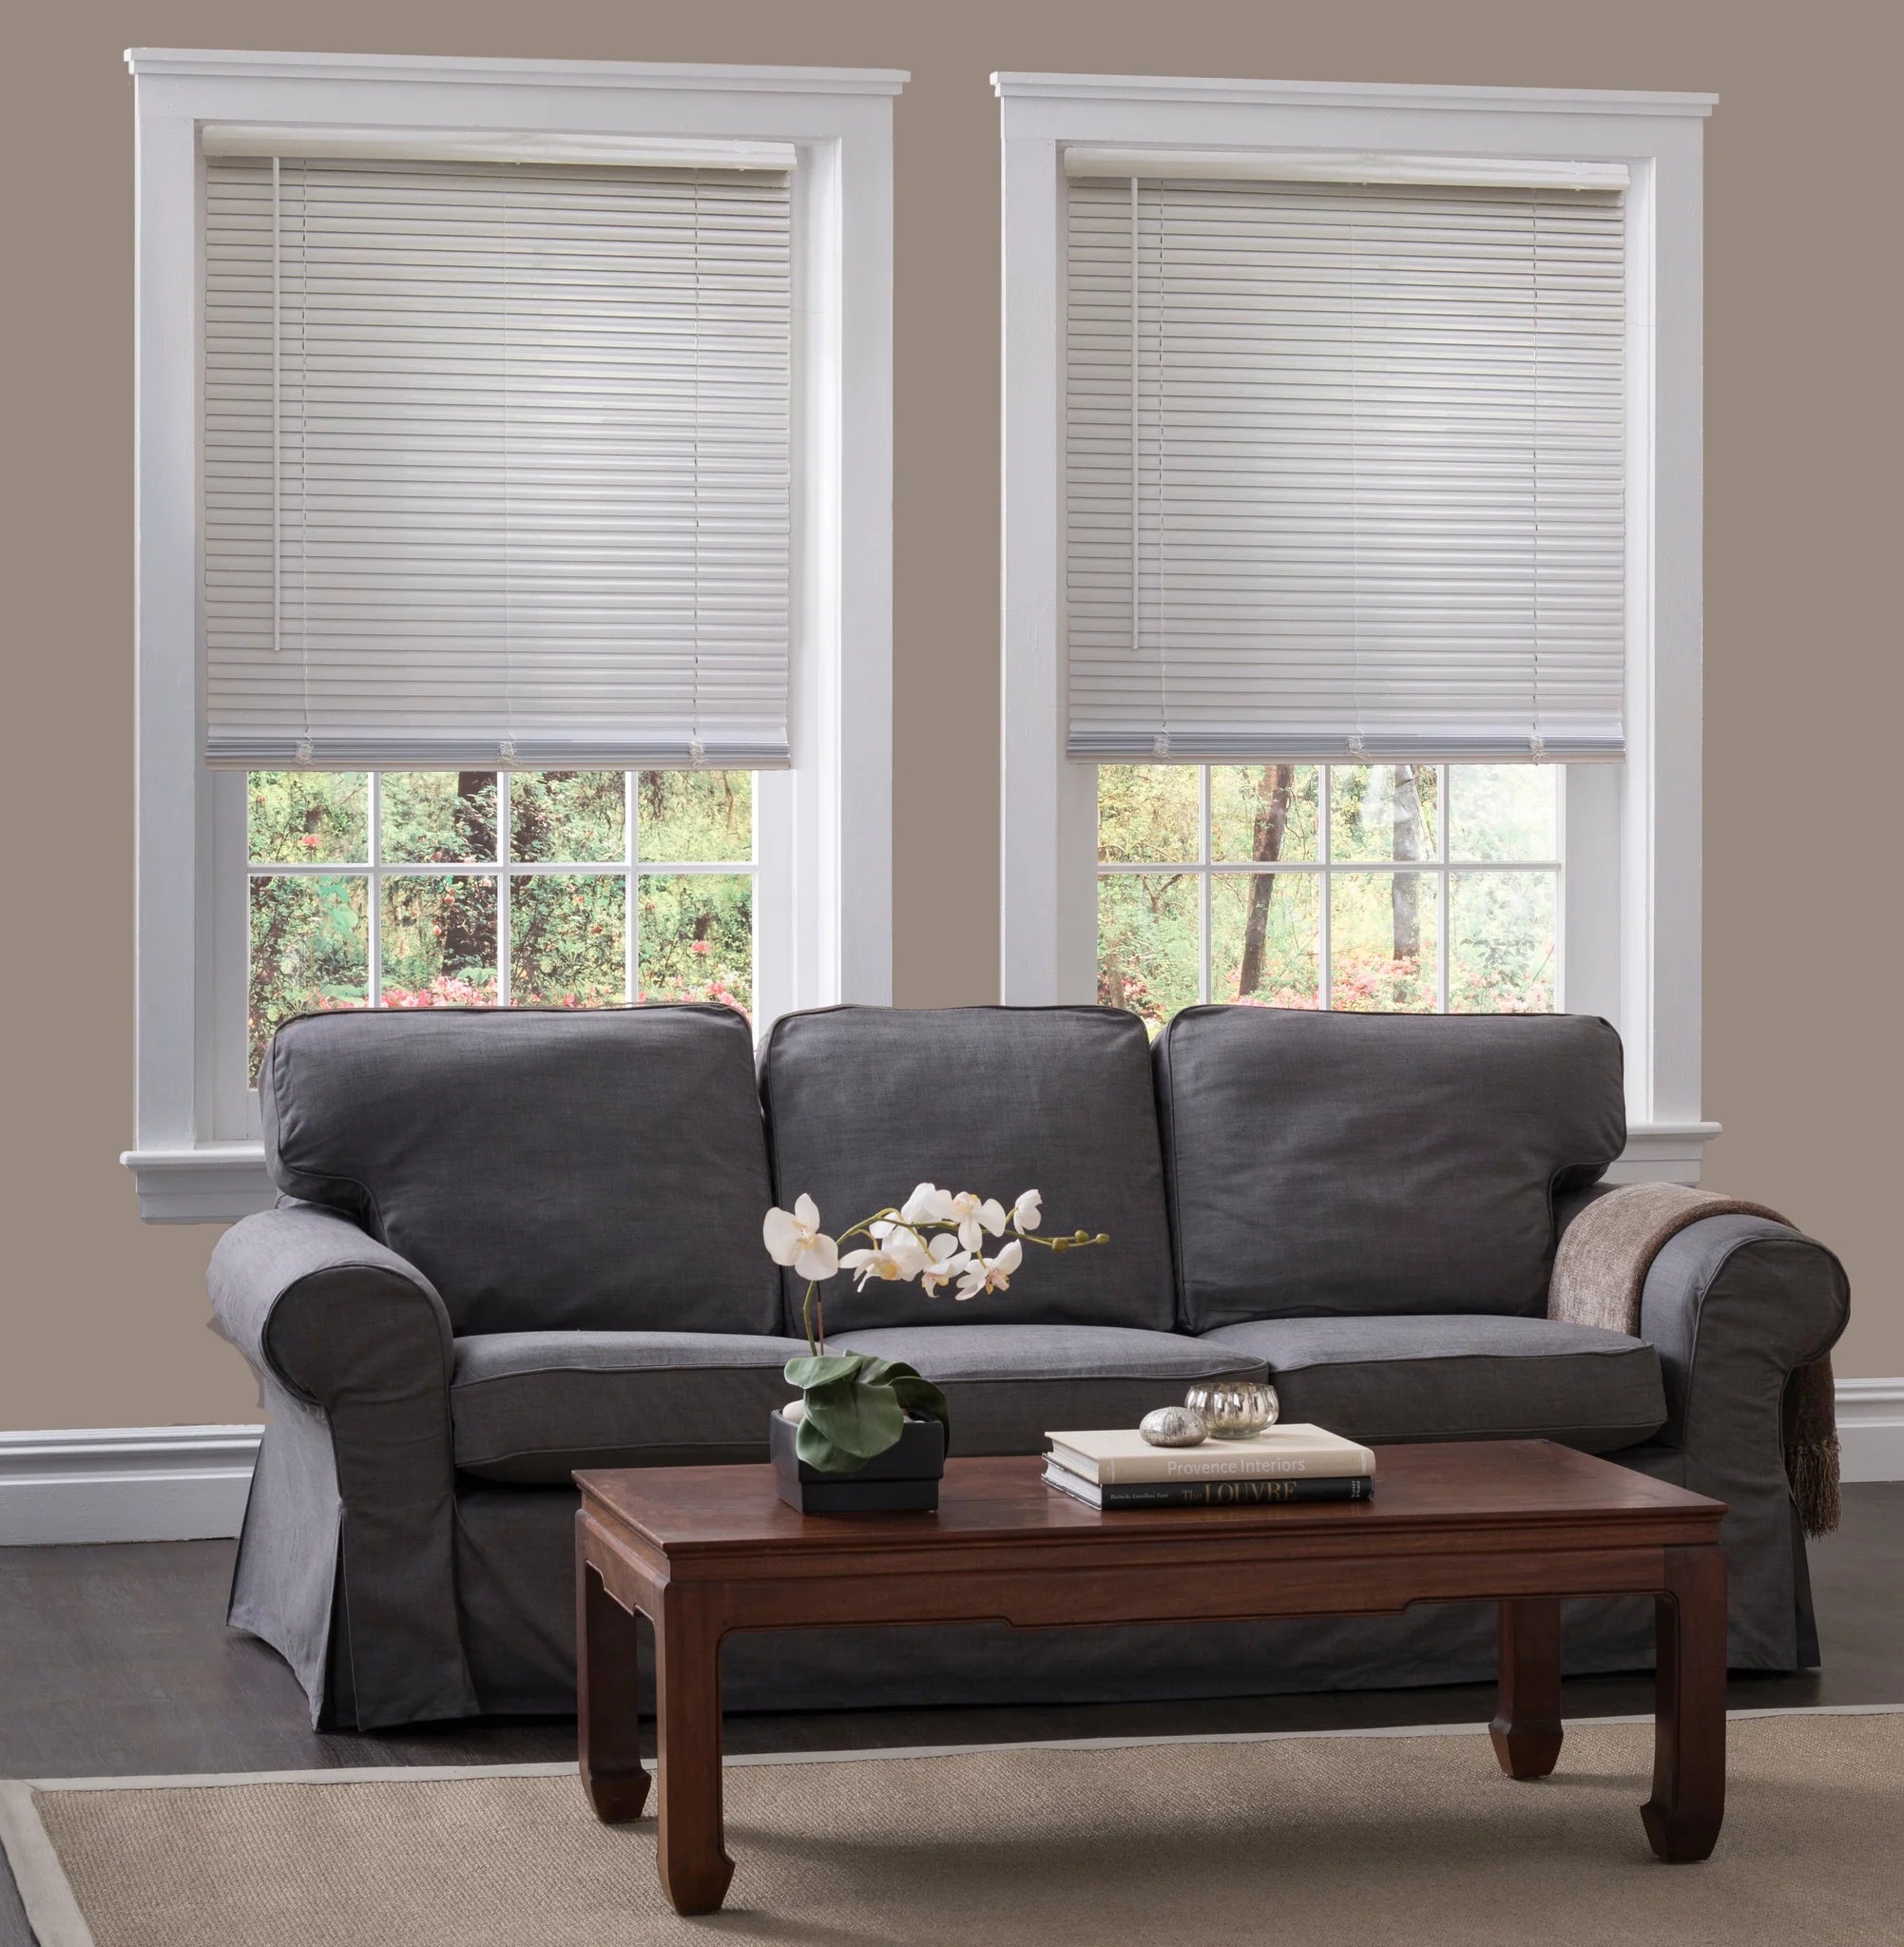 Inside Mount vs Outside Mount Blinds: What's Best in 2023? – Factory Direct  Blinds